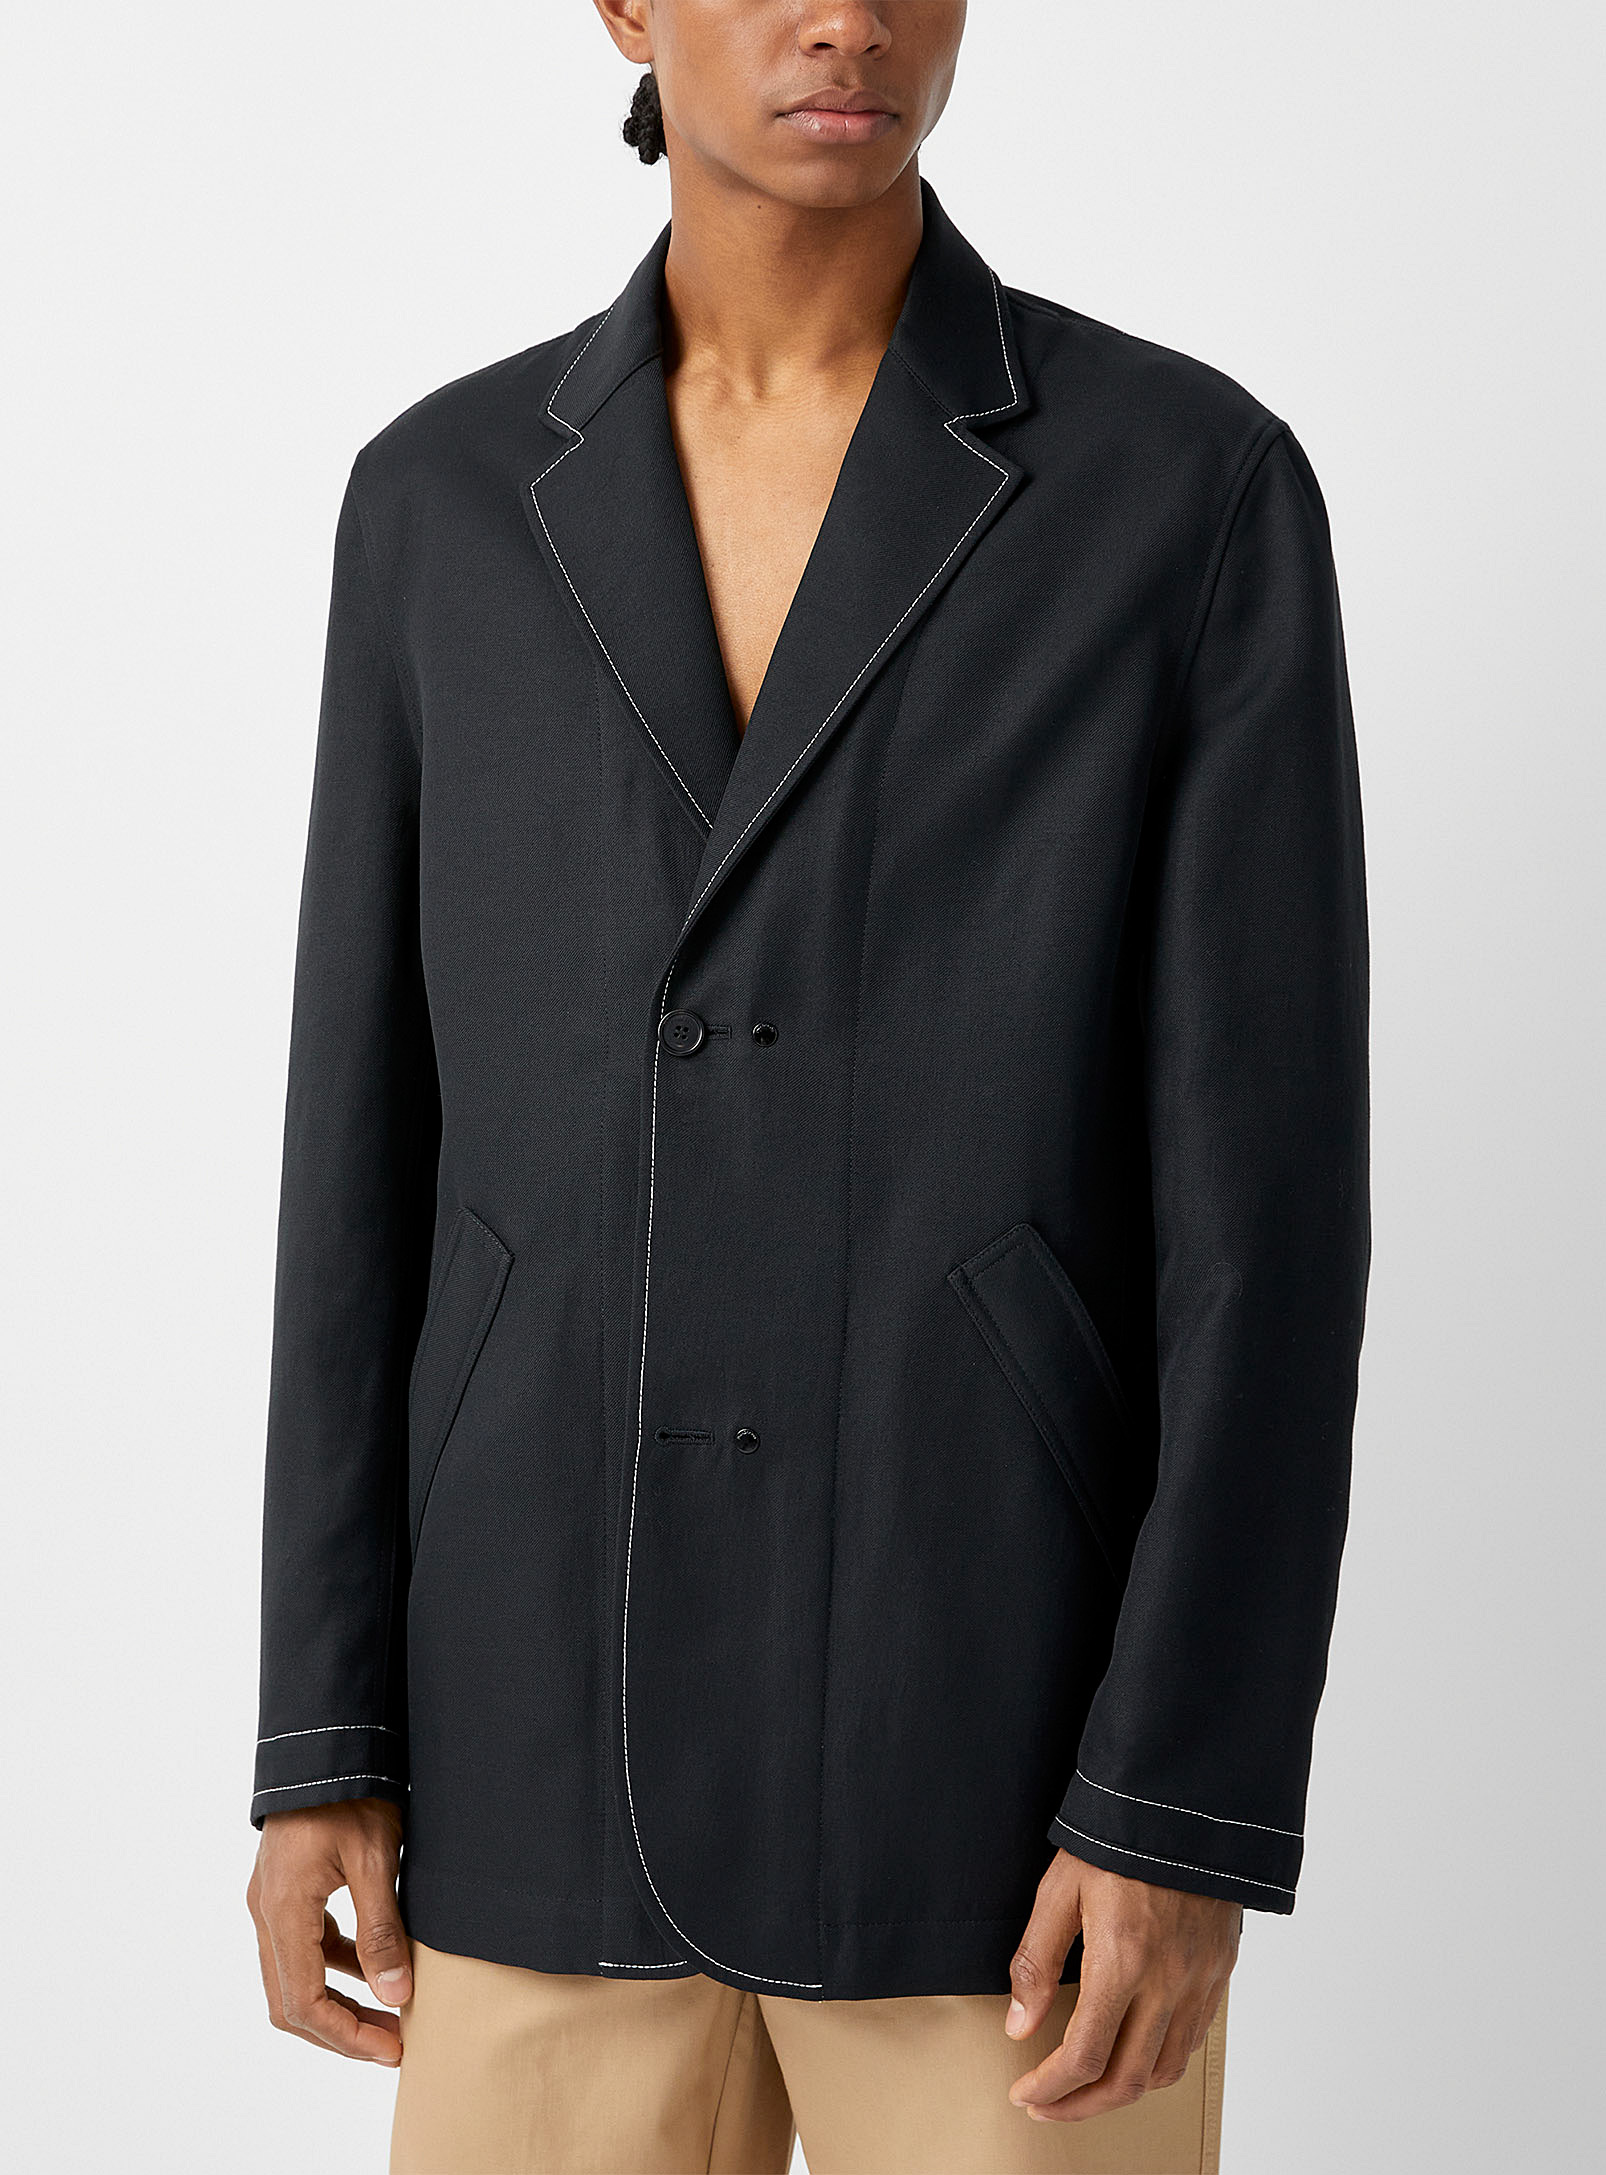 JW ANDERSON ACCENT TOPSTITCHING SUPPLE JACKET